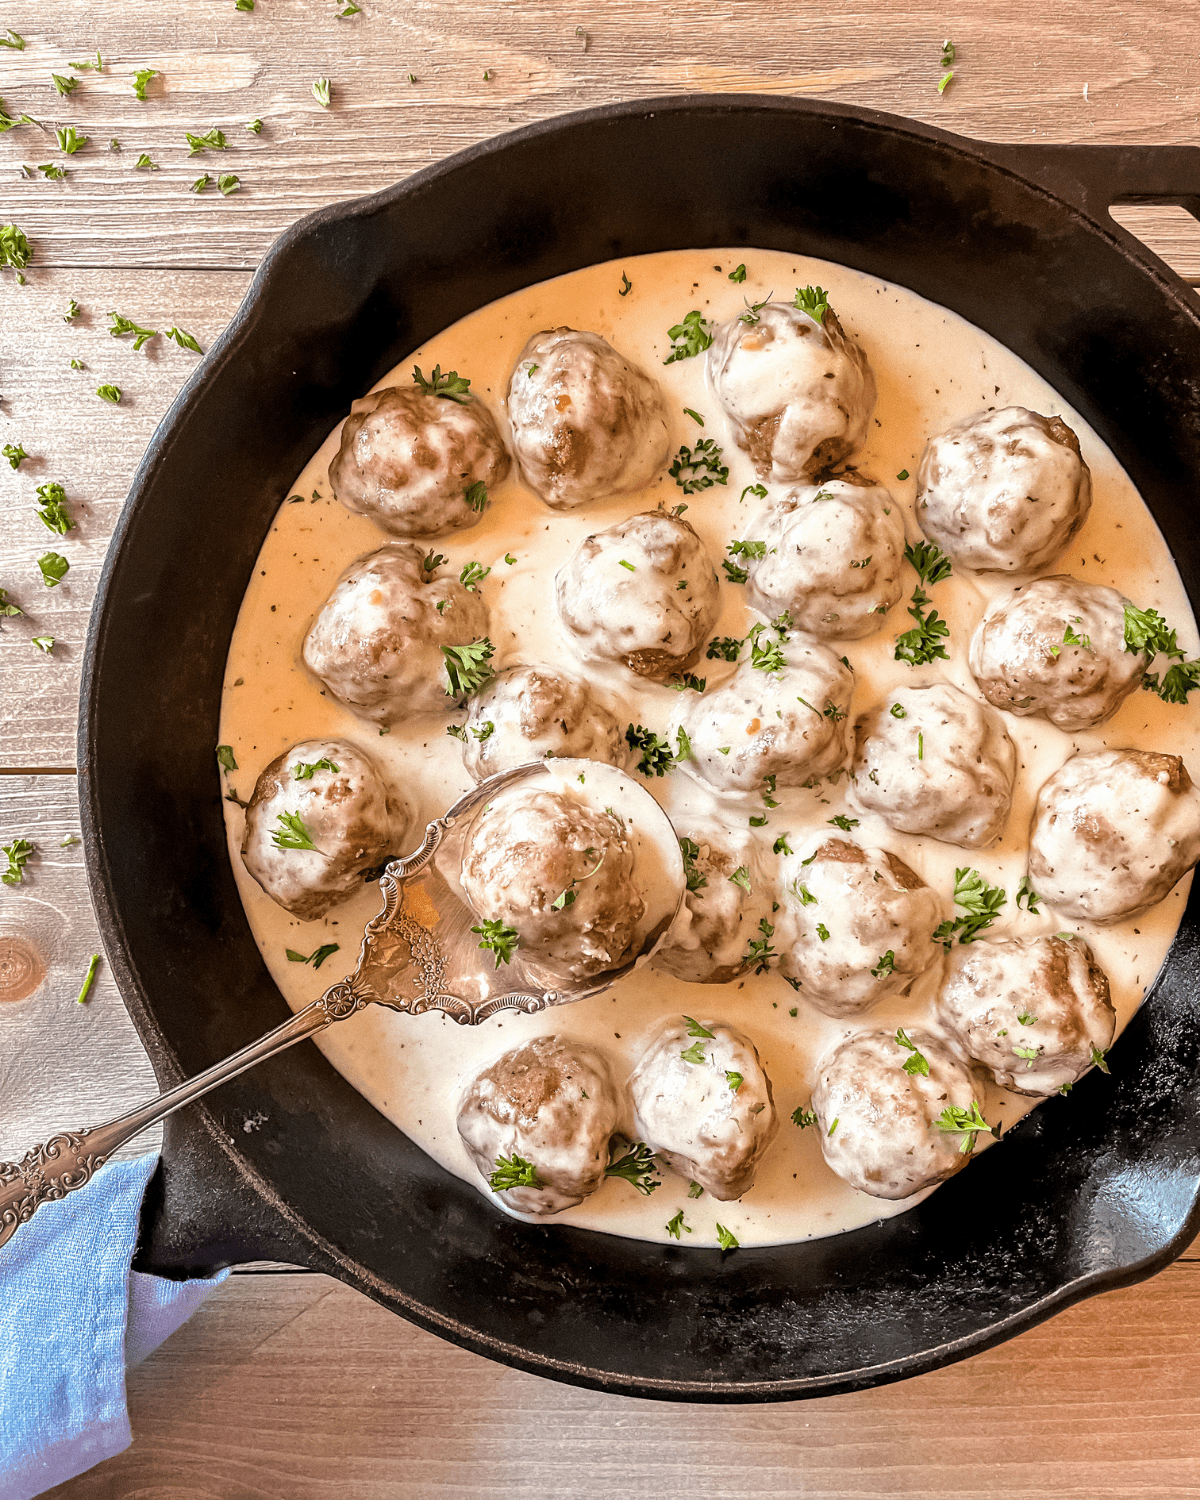 Turkey pesto meatballs in a cast iron skillet, topped with pesto alfredo sauce, garnished with fresh parsley.